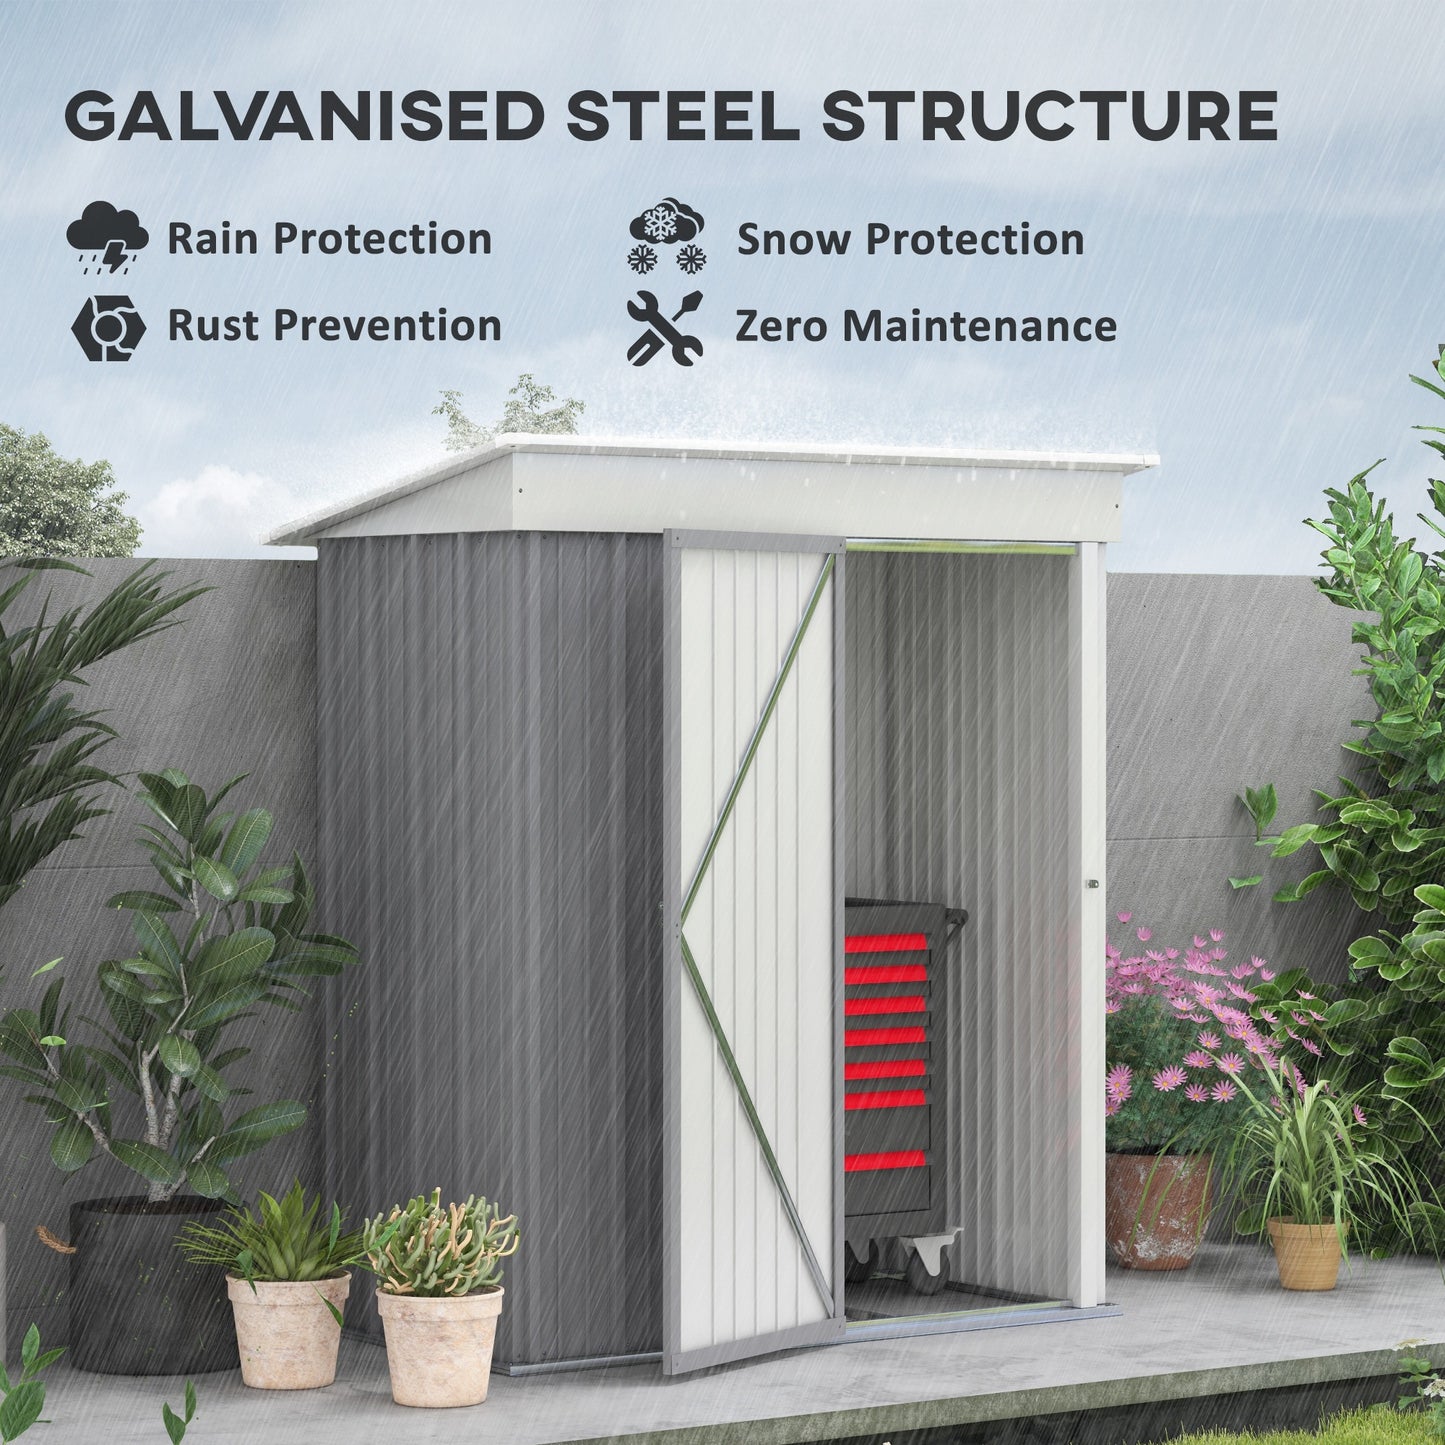 Outsunny Metal Garden Shed, Outdoor Lean-to Shed for Tool Motor Bike, with Adjustable Shelf, Lock, Gloves, 5'x3'x6', Grey